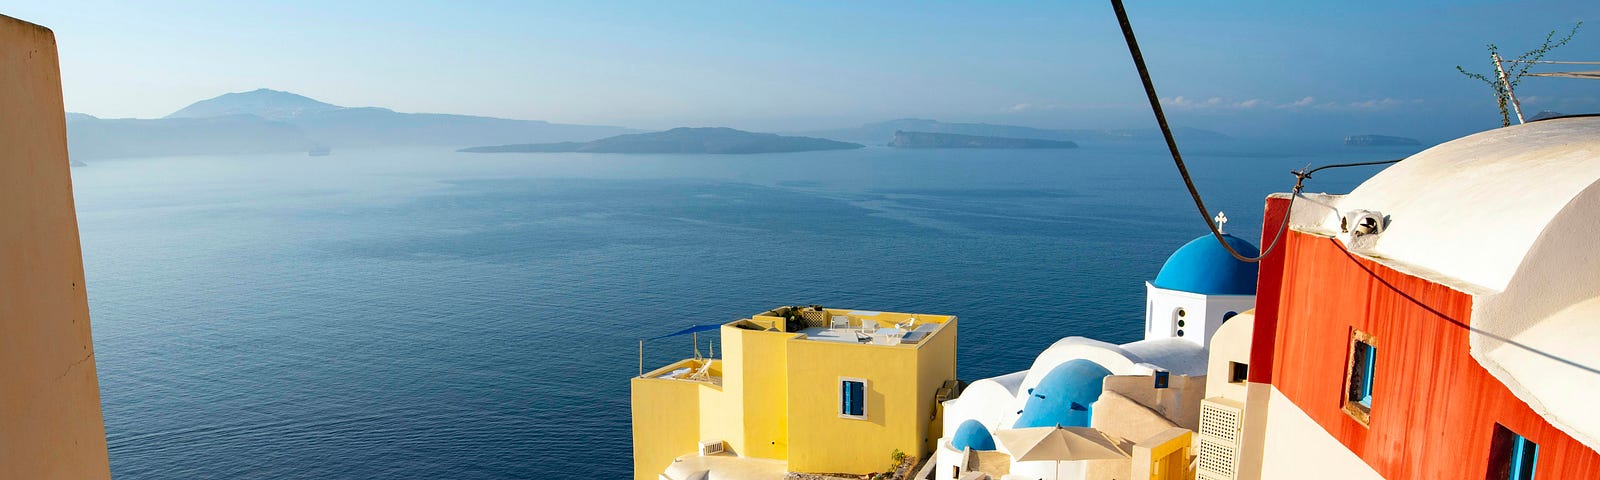 A picture of some buildings in Santorini overlooking the ocean